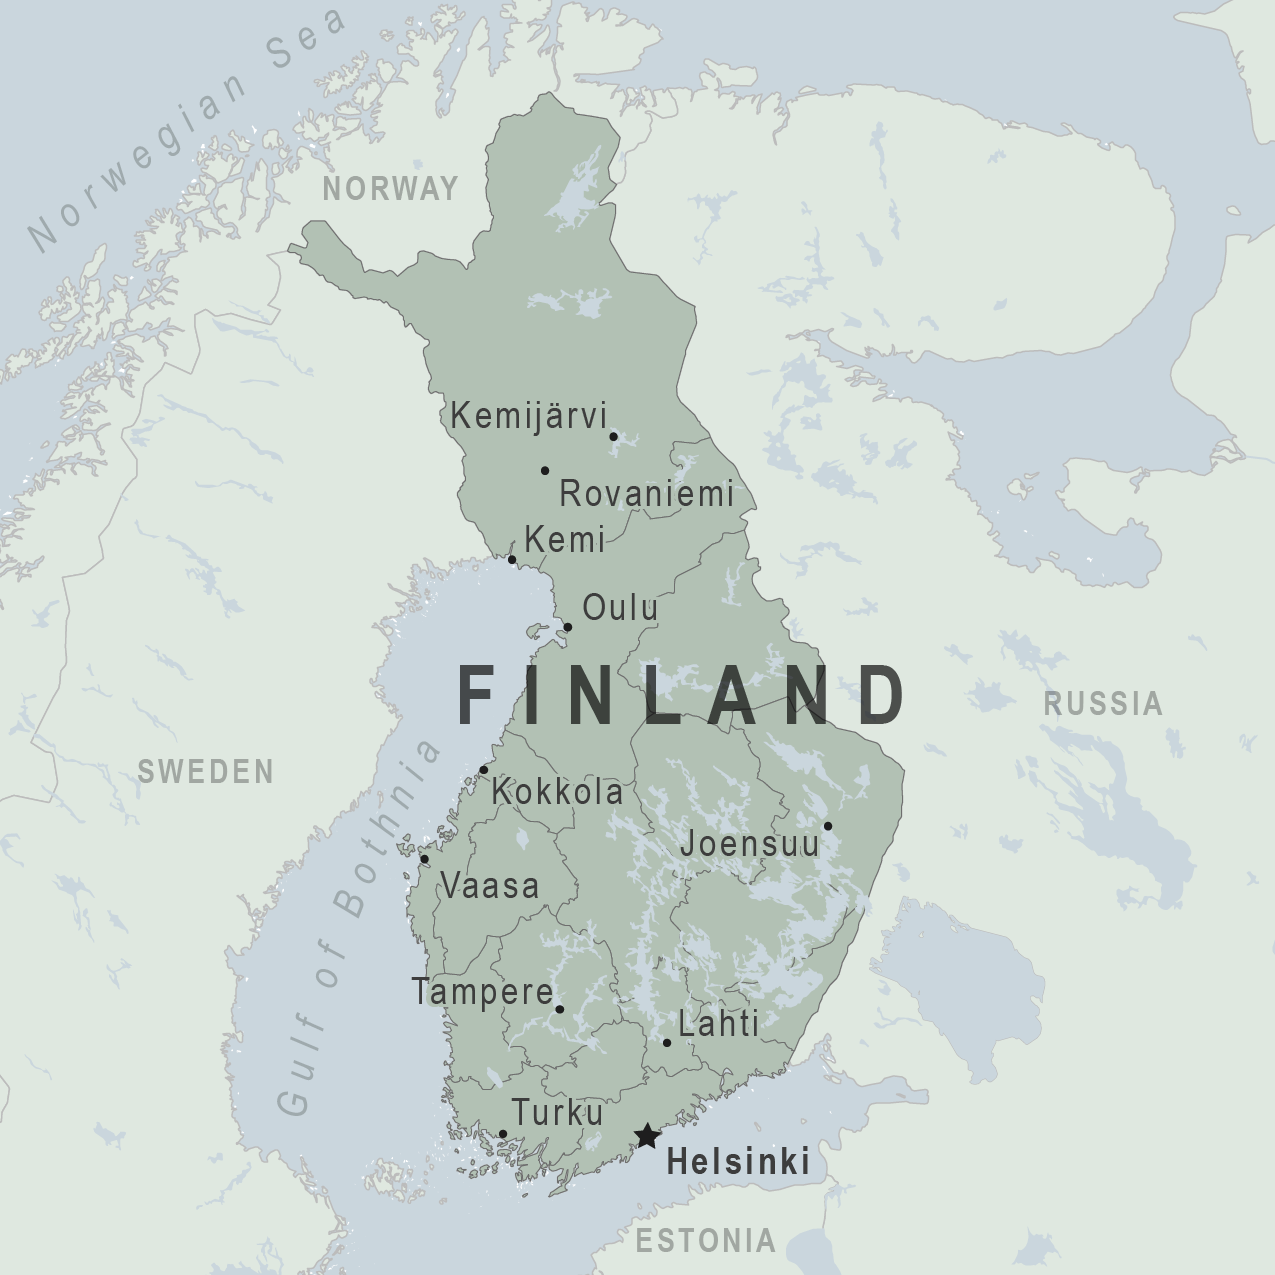 http://wwwnc.cdc.gov/travel/images/map-finland.png